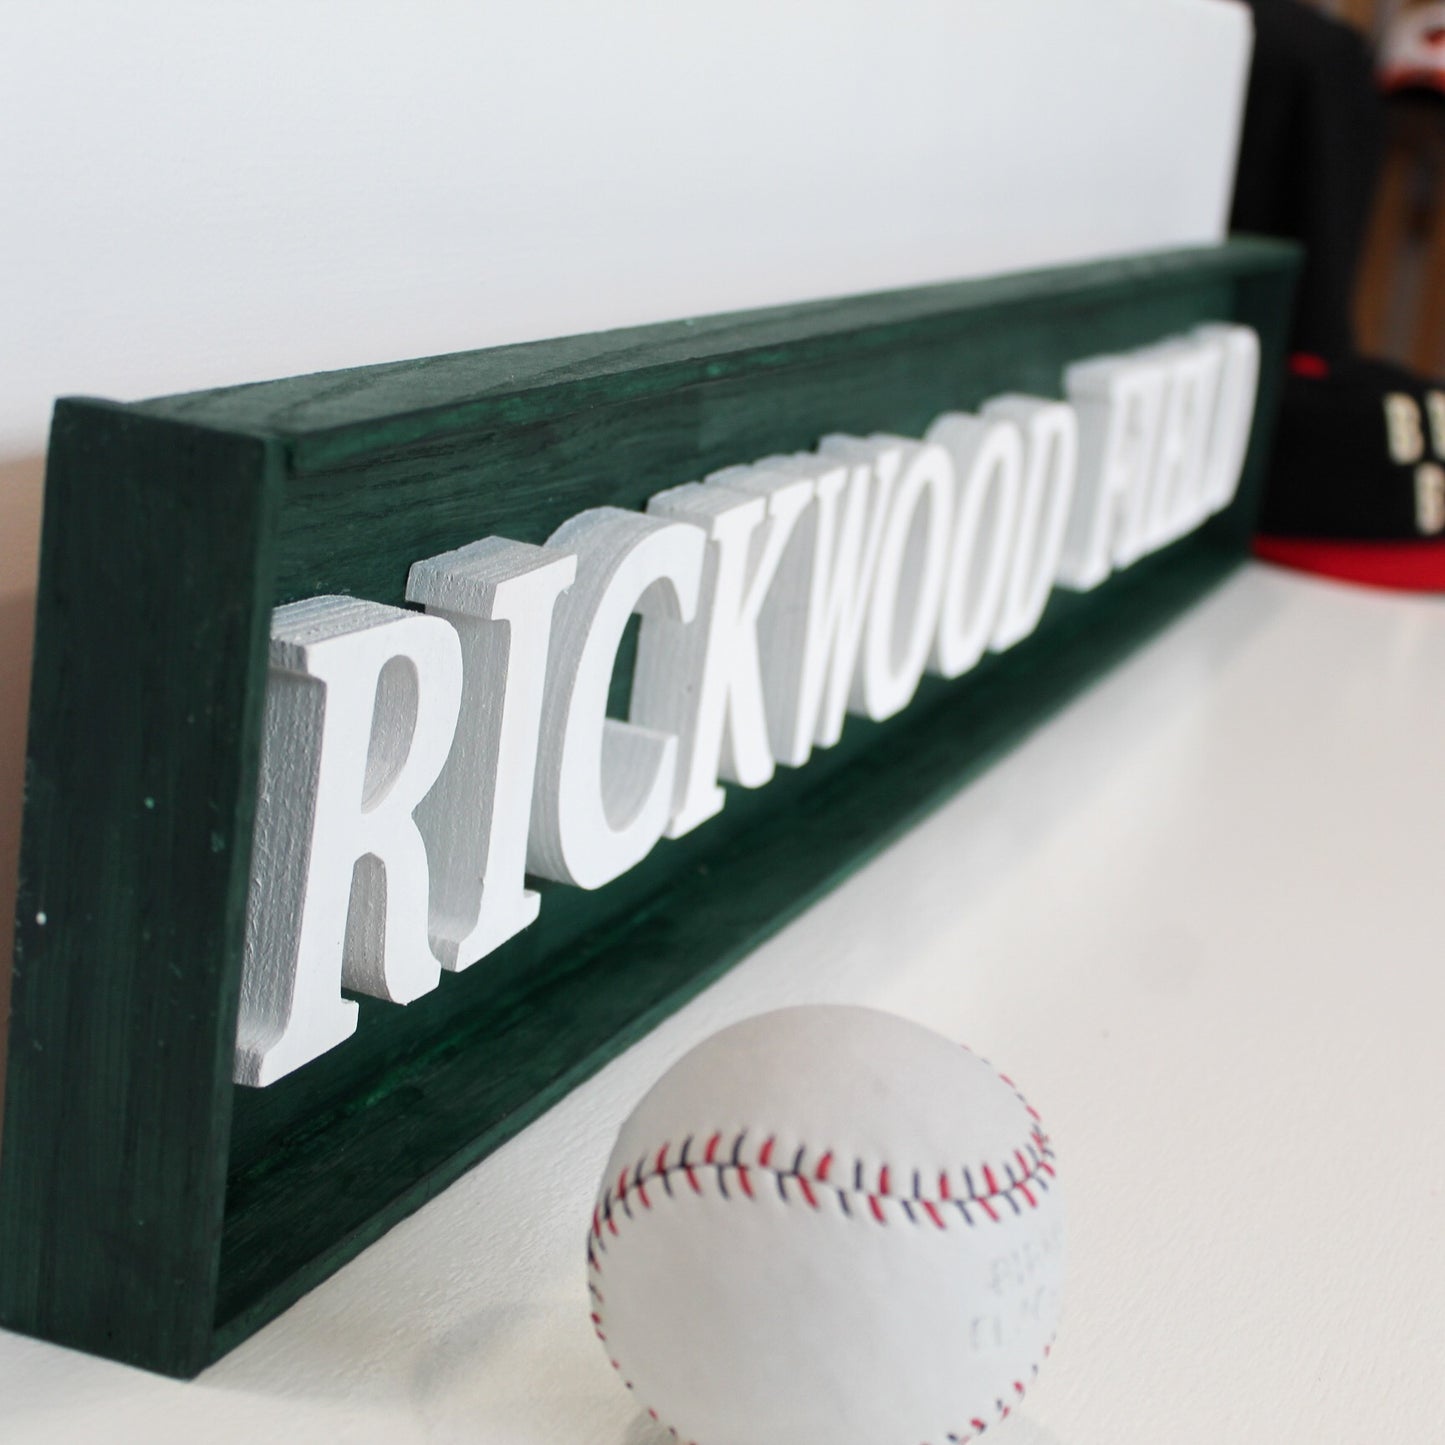 TMCo Rickwood Field Sign